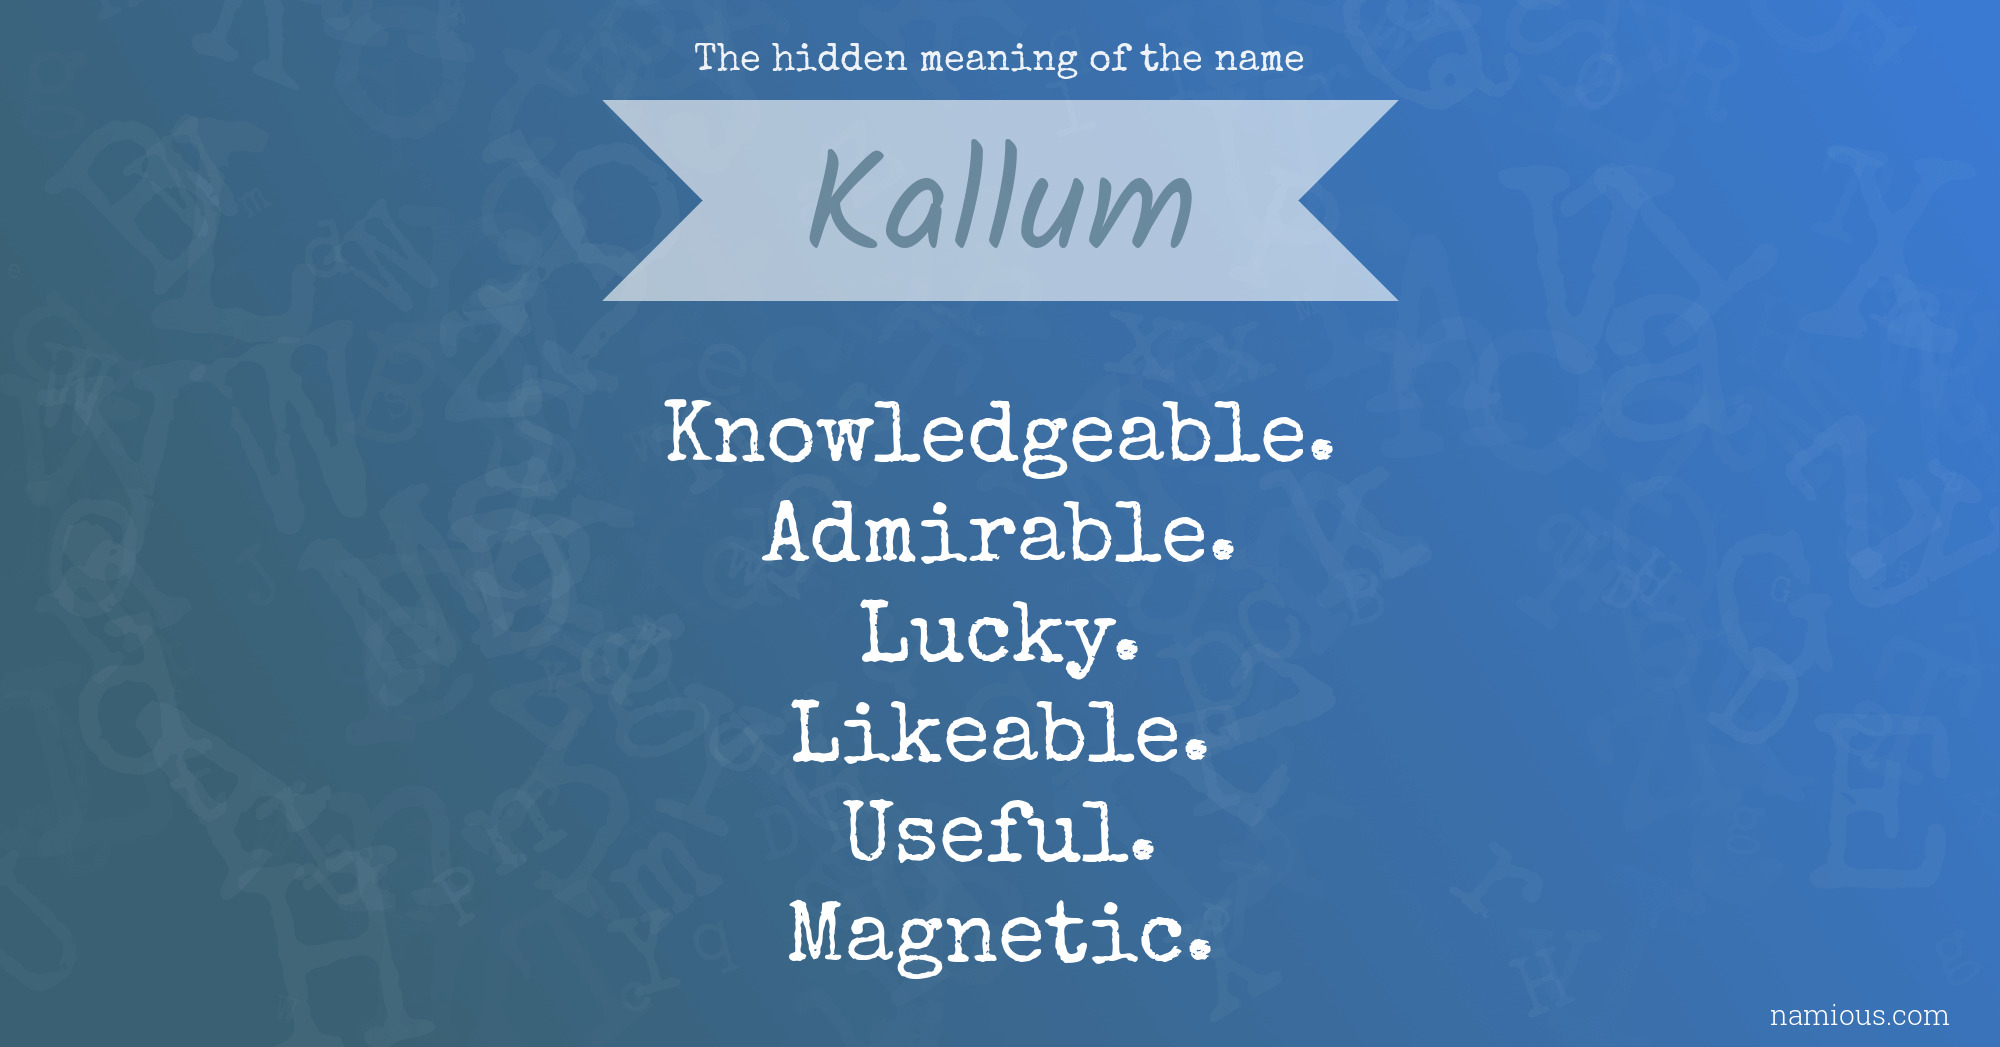 The hidden meaning of the name Kallum